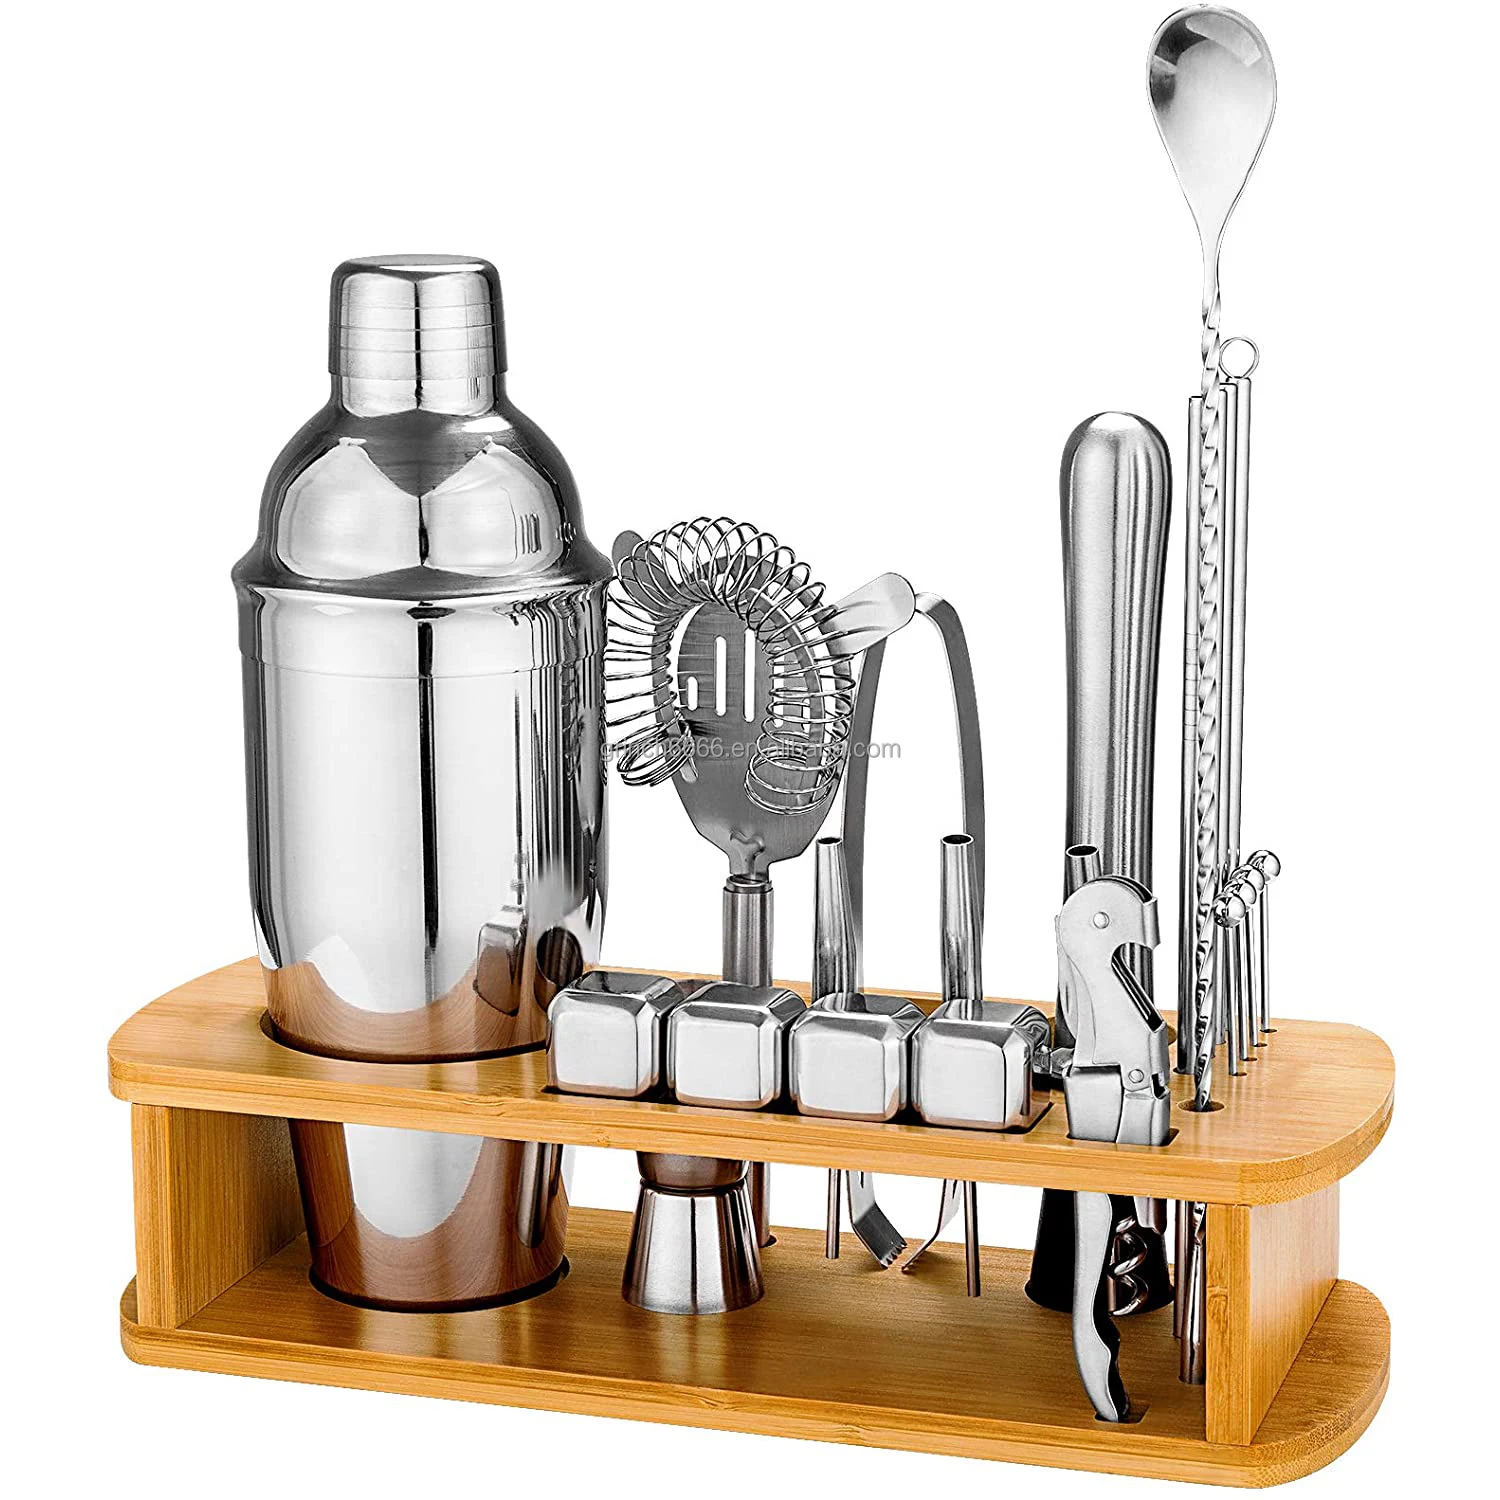 ADTZYLD Cocktail Shaker Set Bartender Kit,Bar Set with Bamboo Stand 12 Piece Bartending Tools 25 oz Professional Stainless Steel Martini Shaker with Cocktail Recipes Booklet 